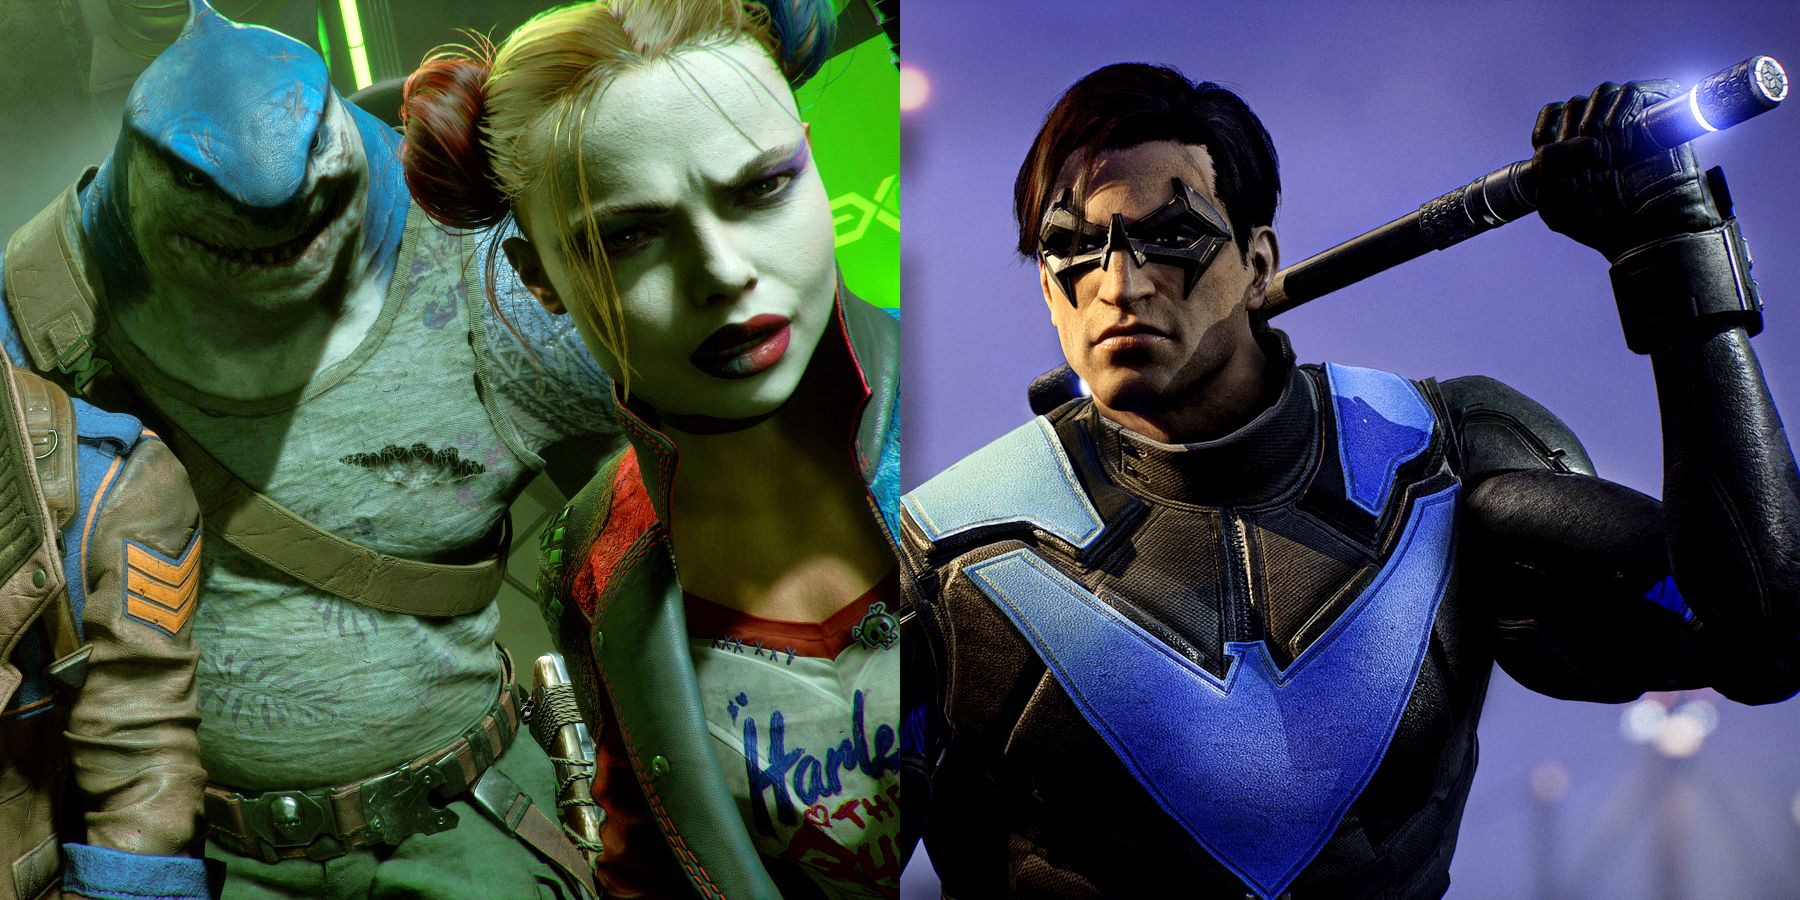 DC characters King Shark, Harley Quinn, and Nightwing from the games Suicide Squad: Kill the Justice League and Gotham Knights.